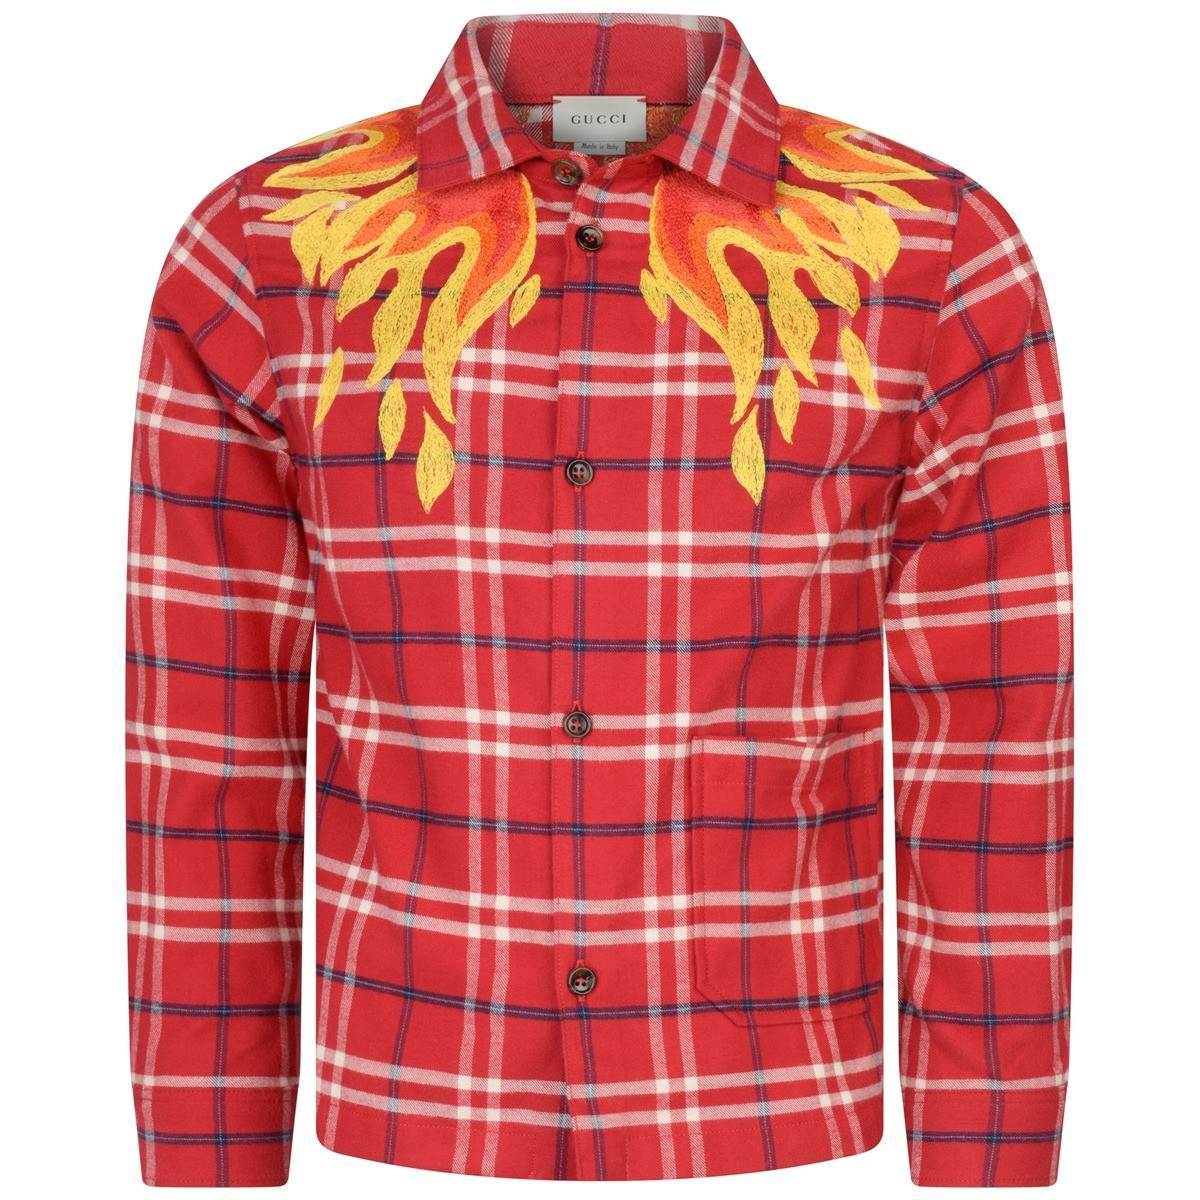 Red Check Clothing Logo - GUCCI *EXCLUSIVE* Boys Red Check Shirt